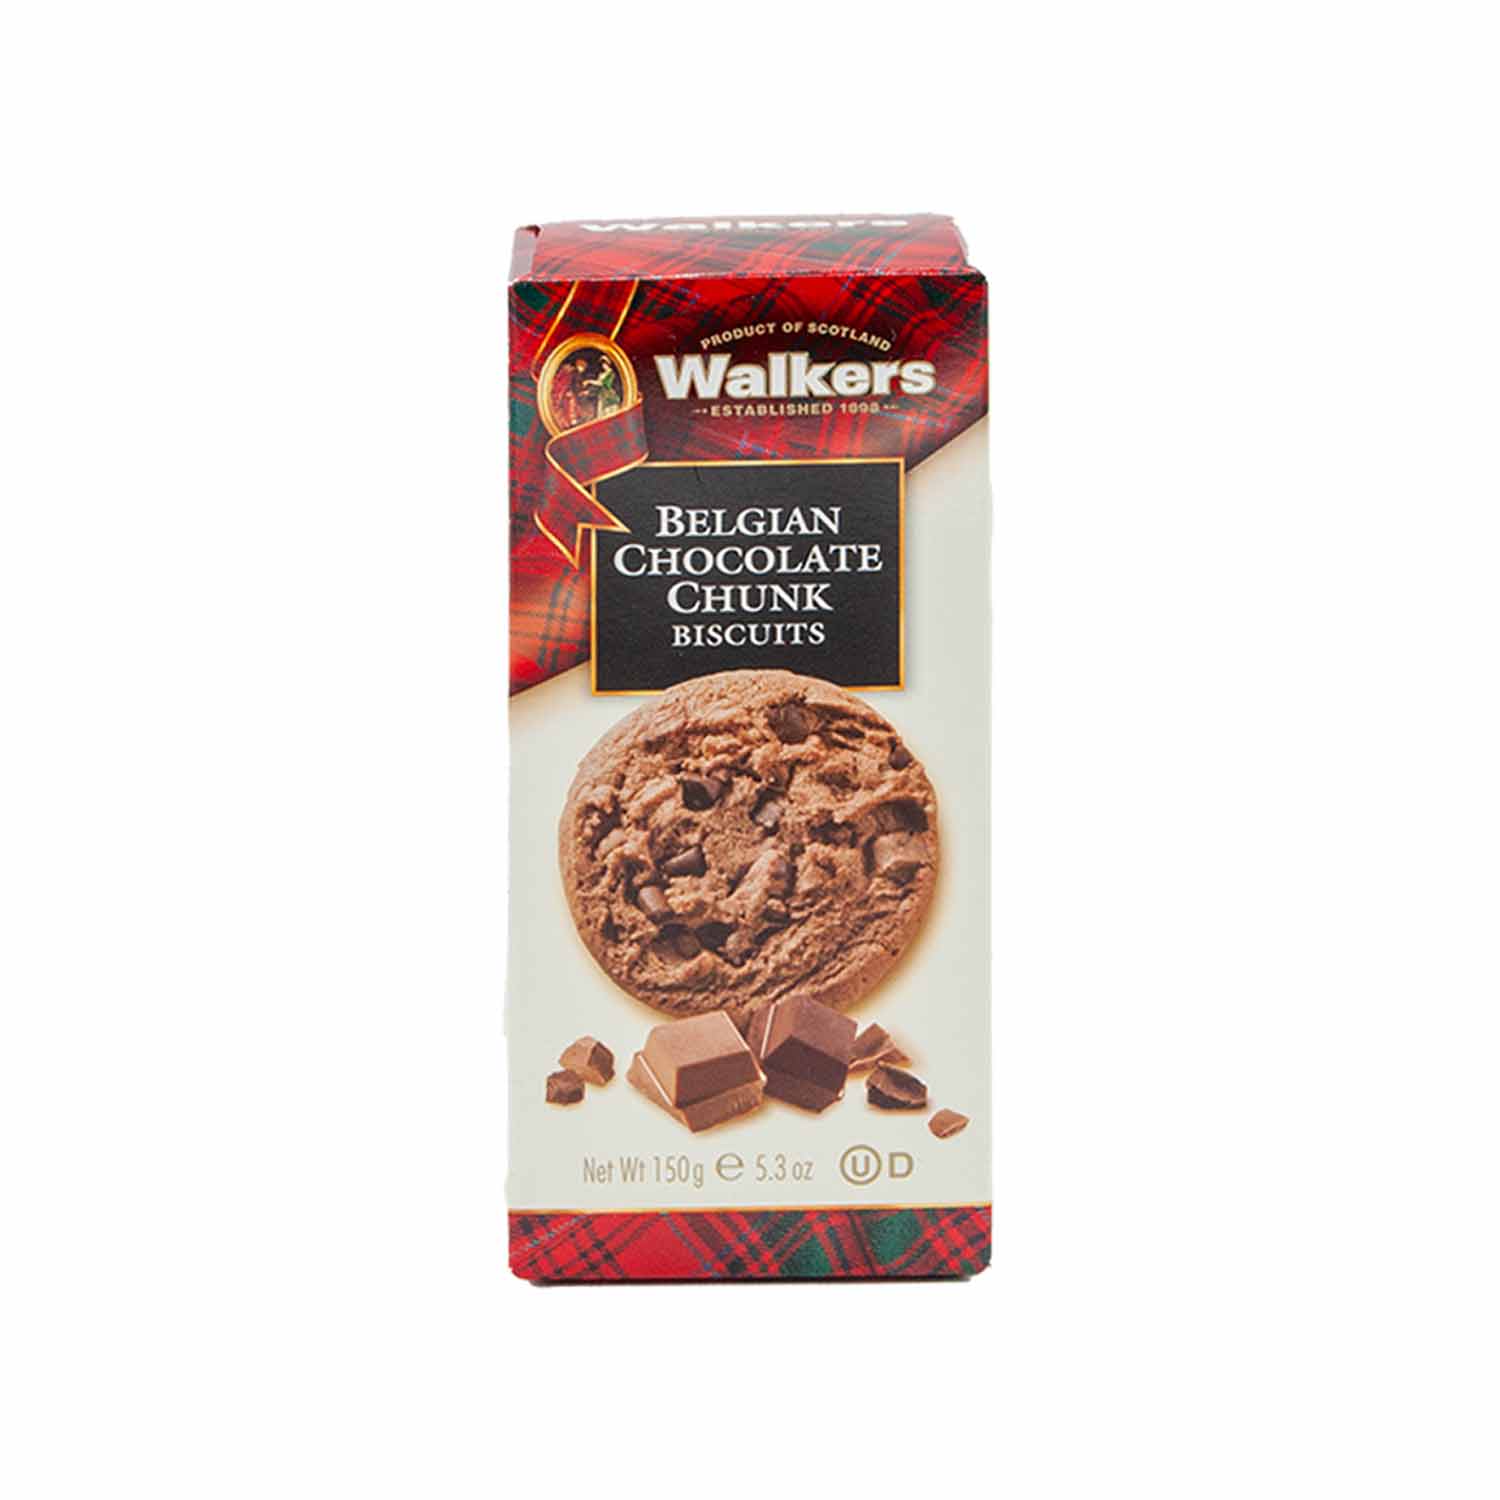 Walkers Belgian Chocolate Chunk Biscuits, 150g